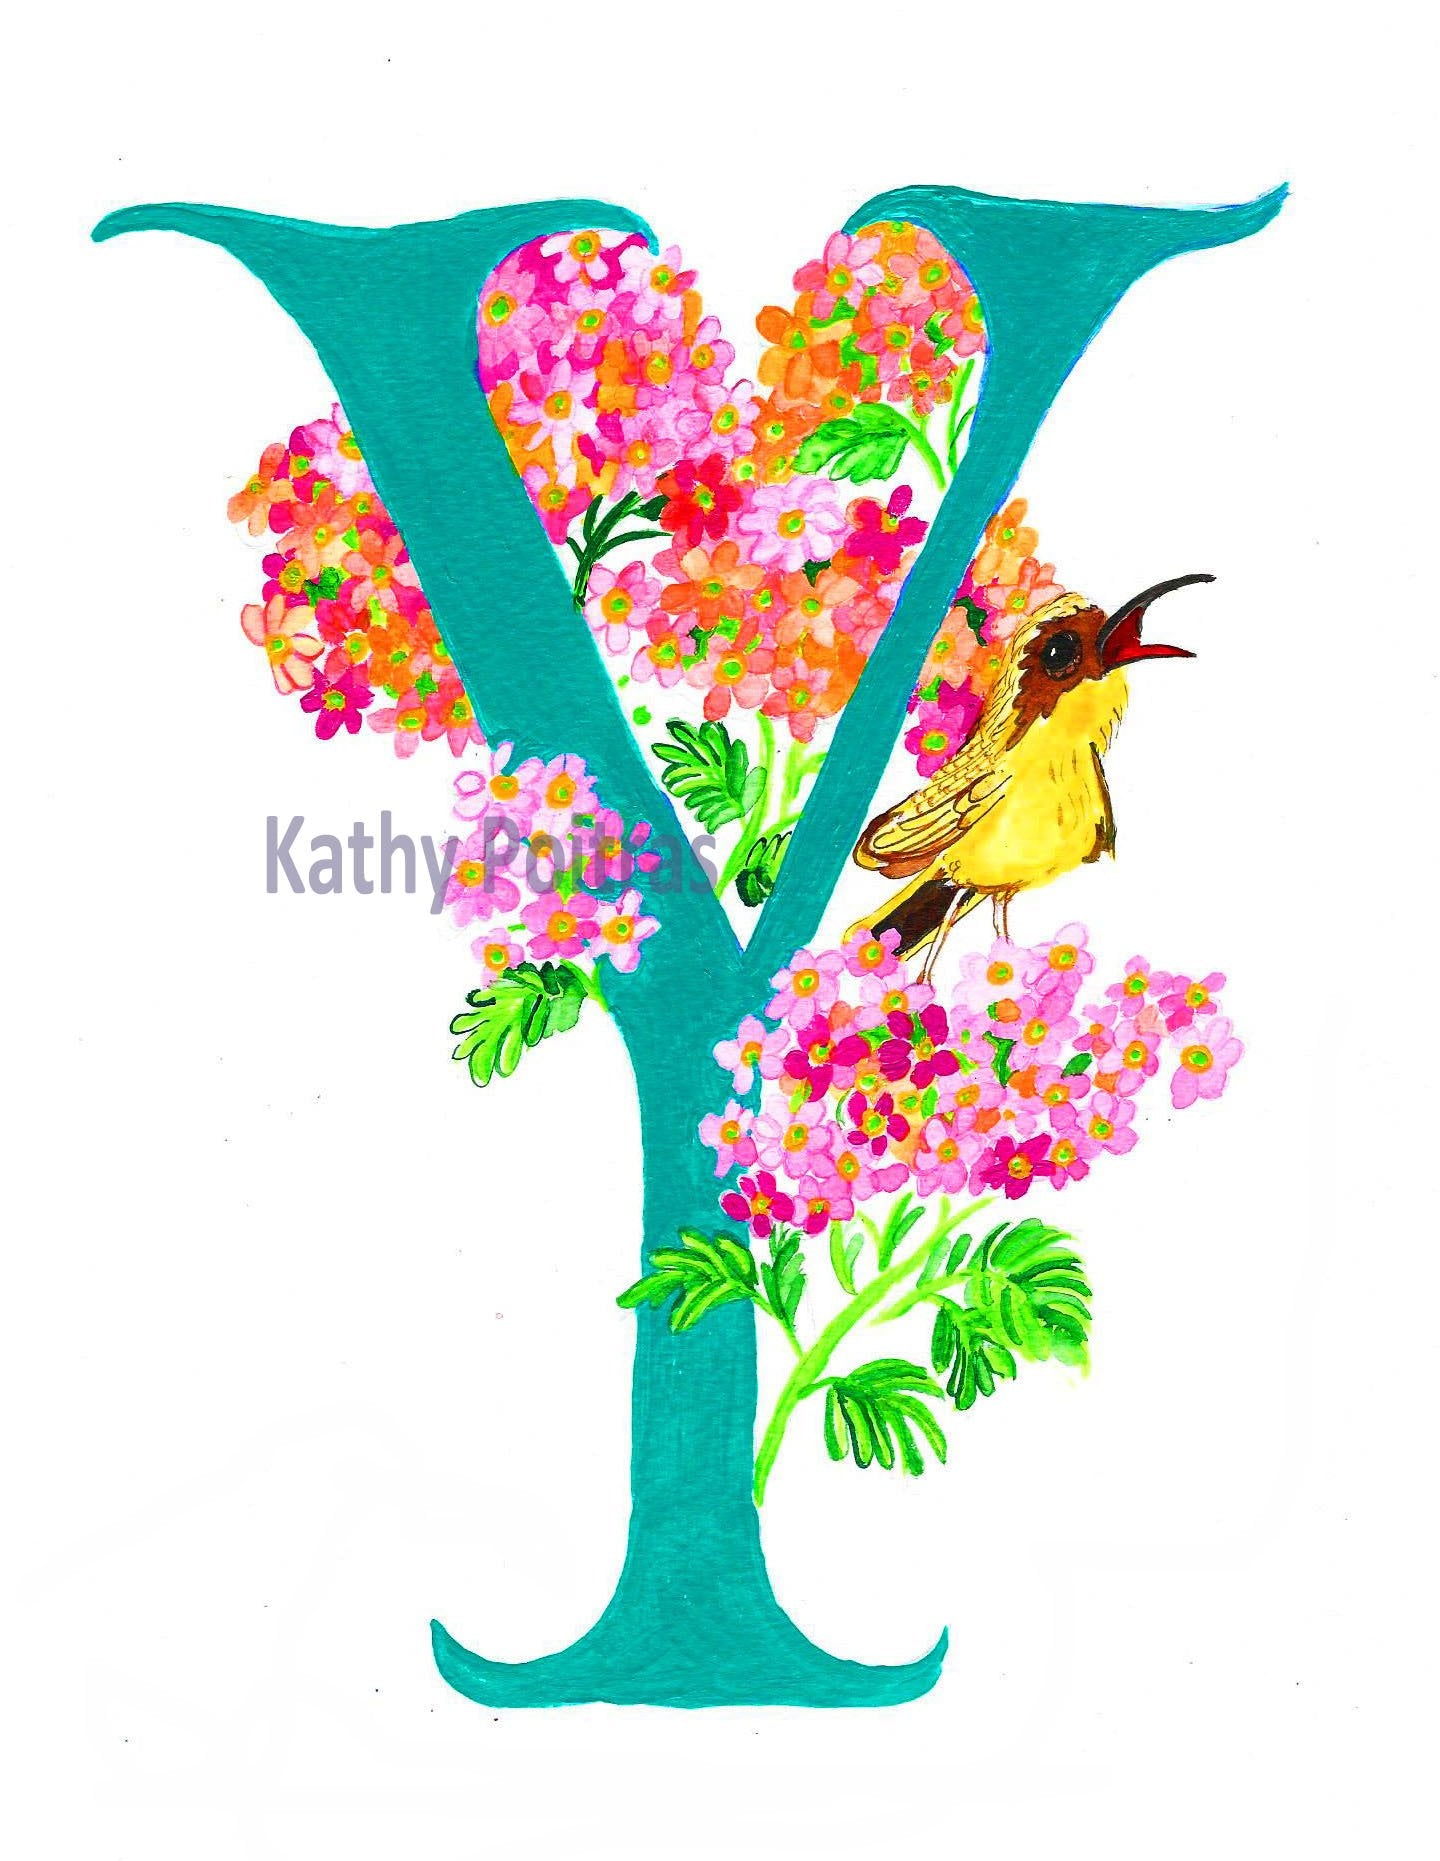 Hand made photographic Personalized Greeting Card. Illustrated Letter Y is for Yarrow flowers and Yellowthroat Bird,  by artist Kathy Poitras. Blank inside